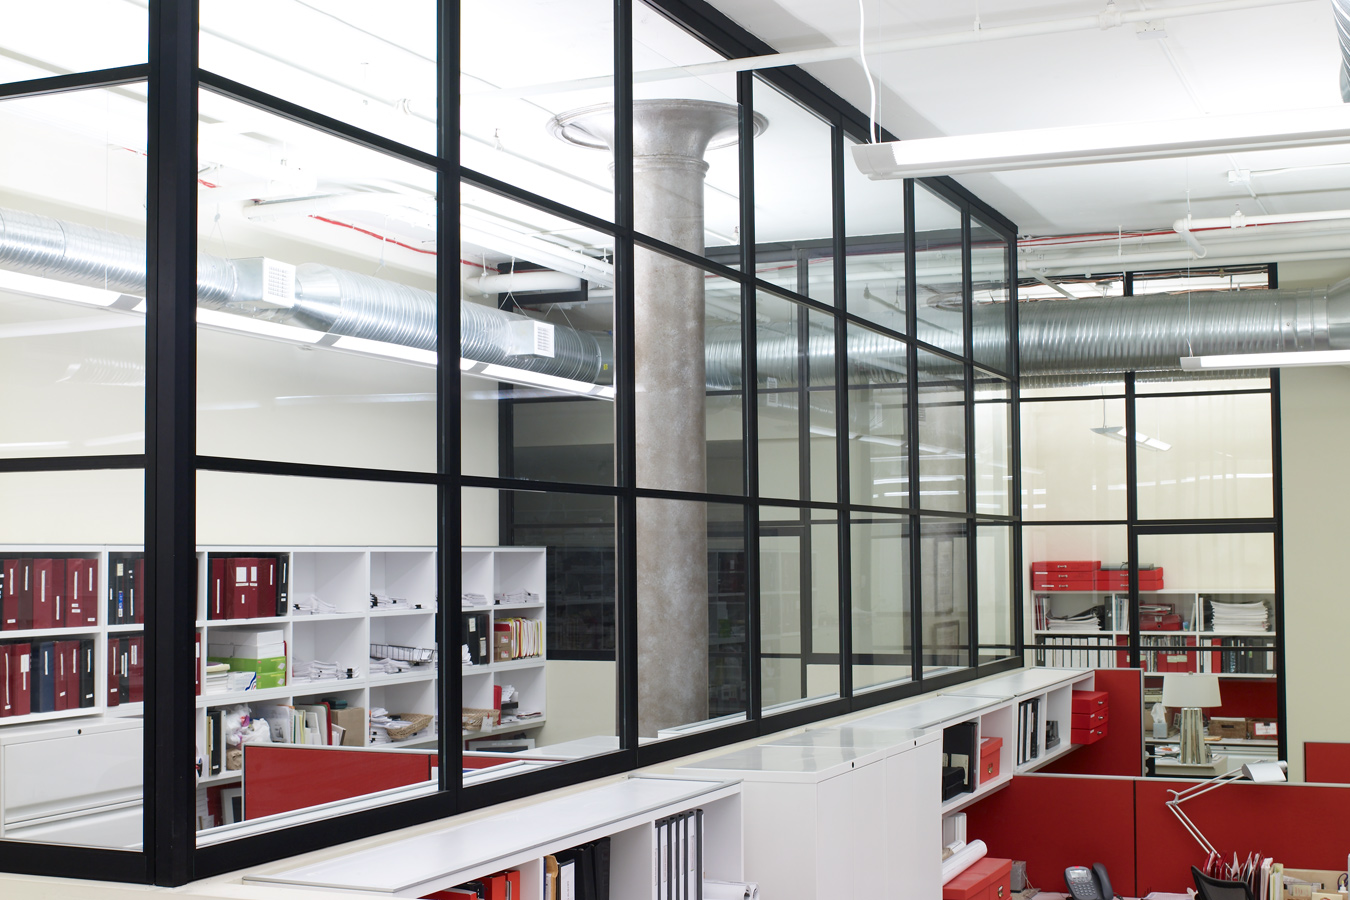 Union Square Offices: Fixed Panel Partitions with Design Continuity